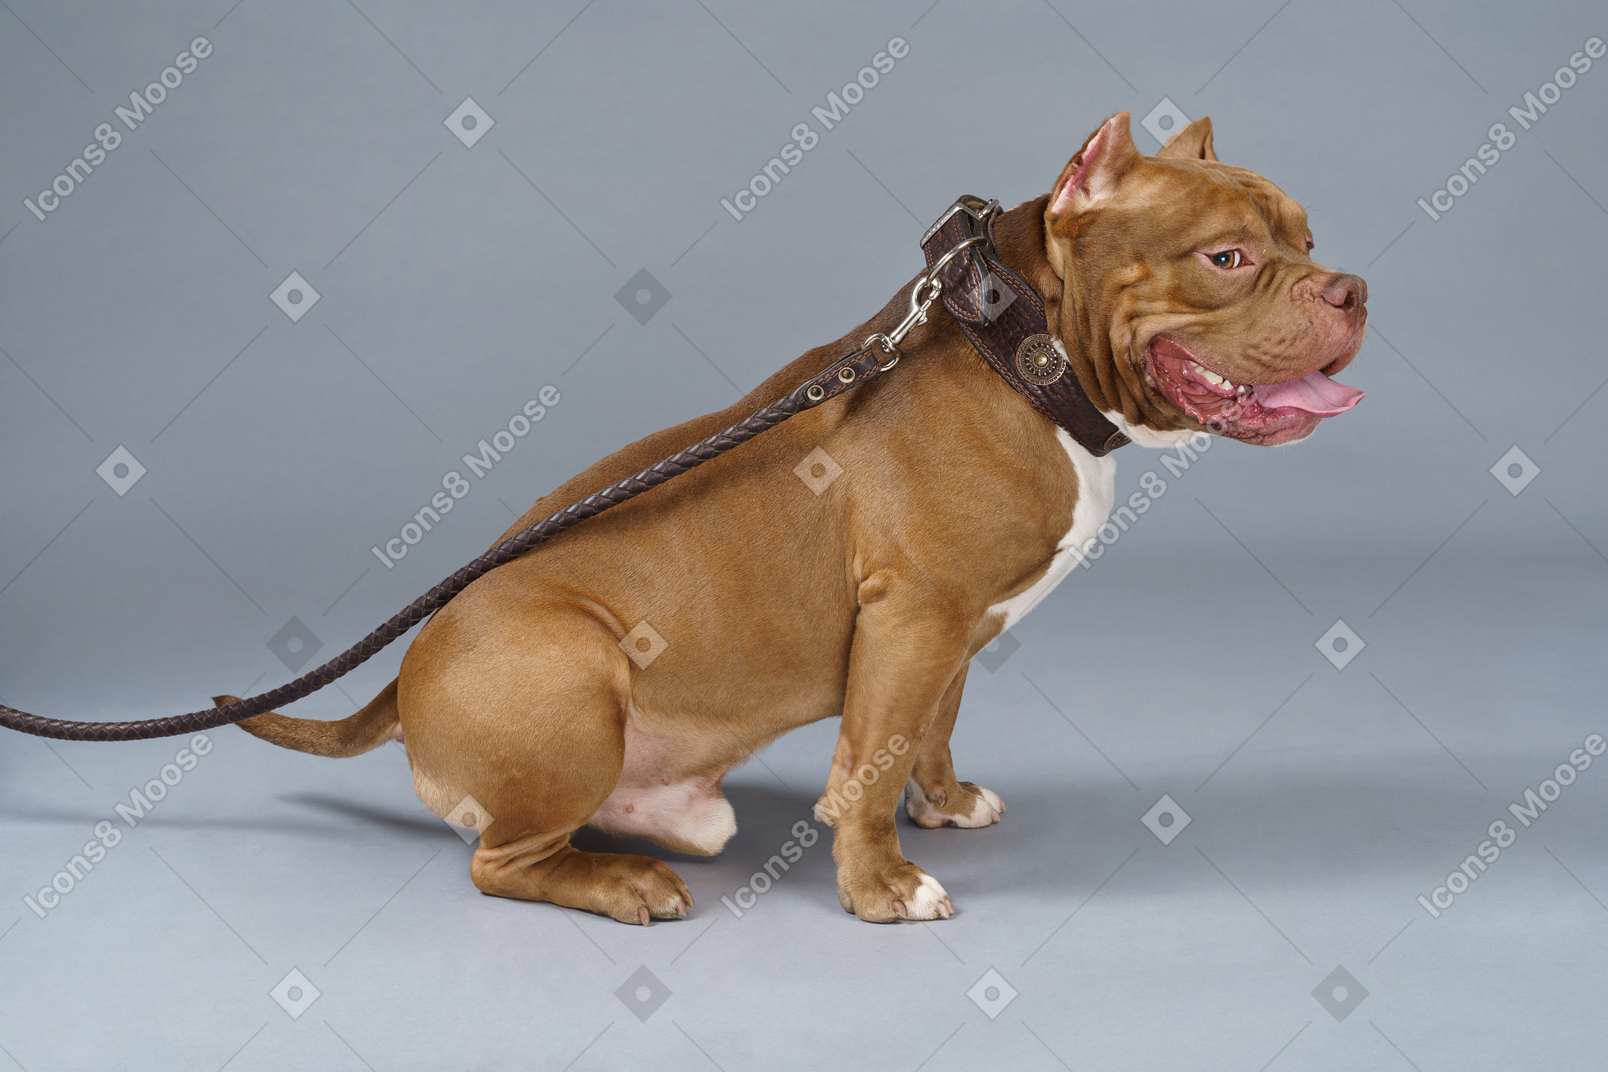 Front view on a brown bulldog sitting with a lead and dog collar